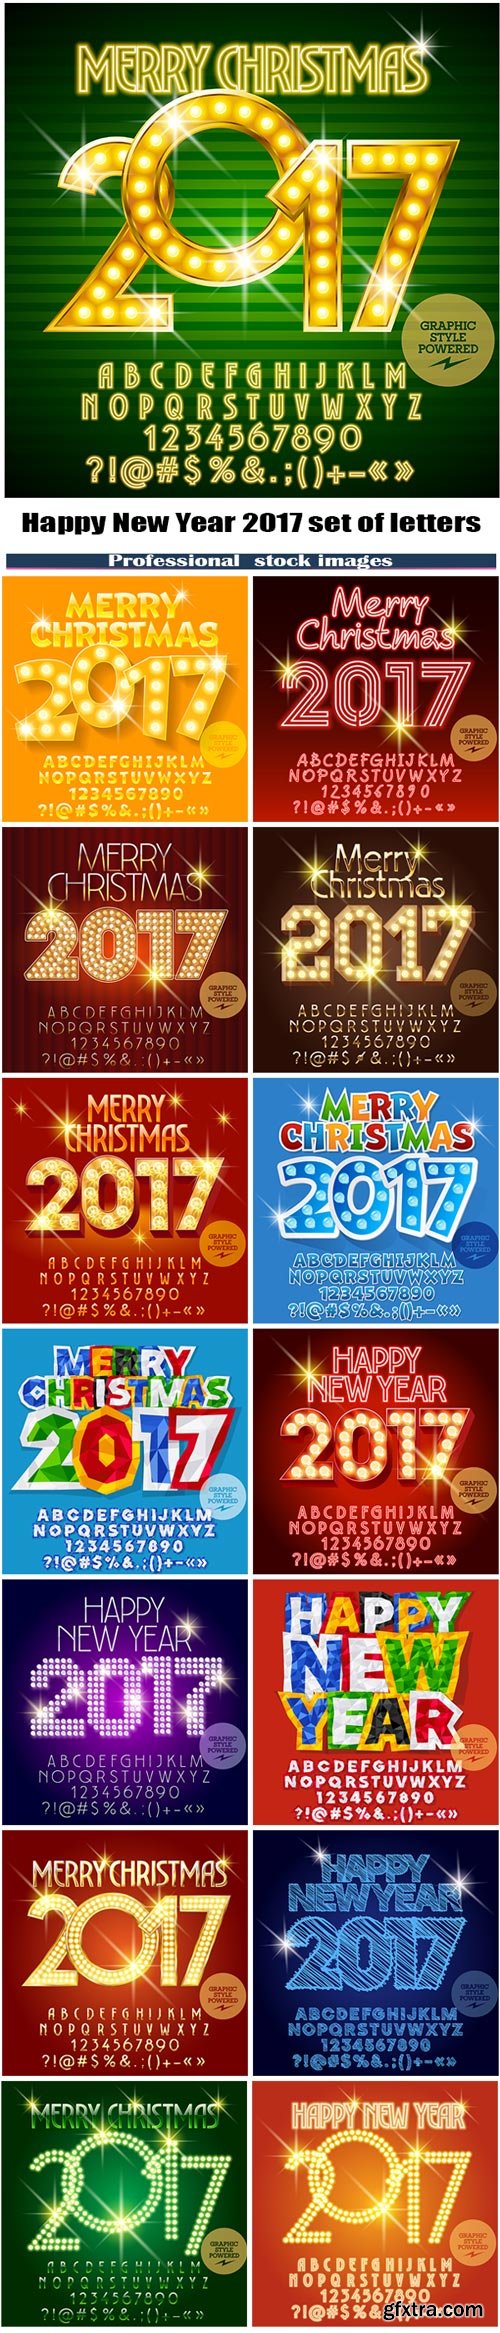 Happy New Year 2017 greeting card with set of letters, symbols and numbers